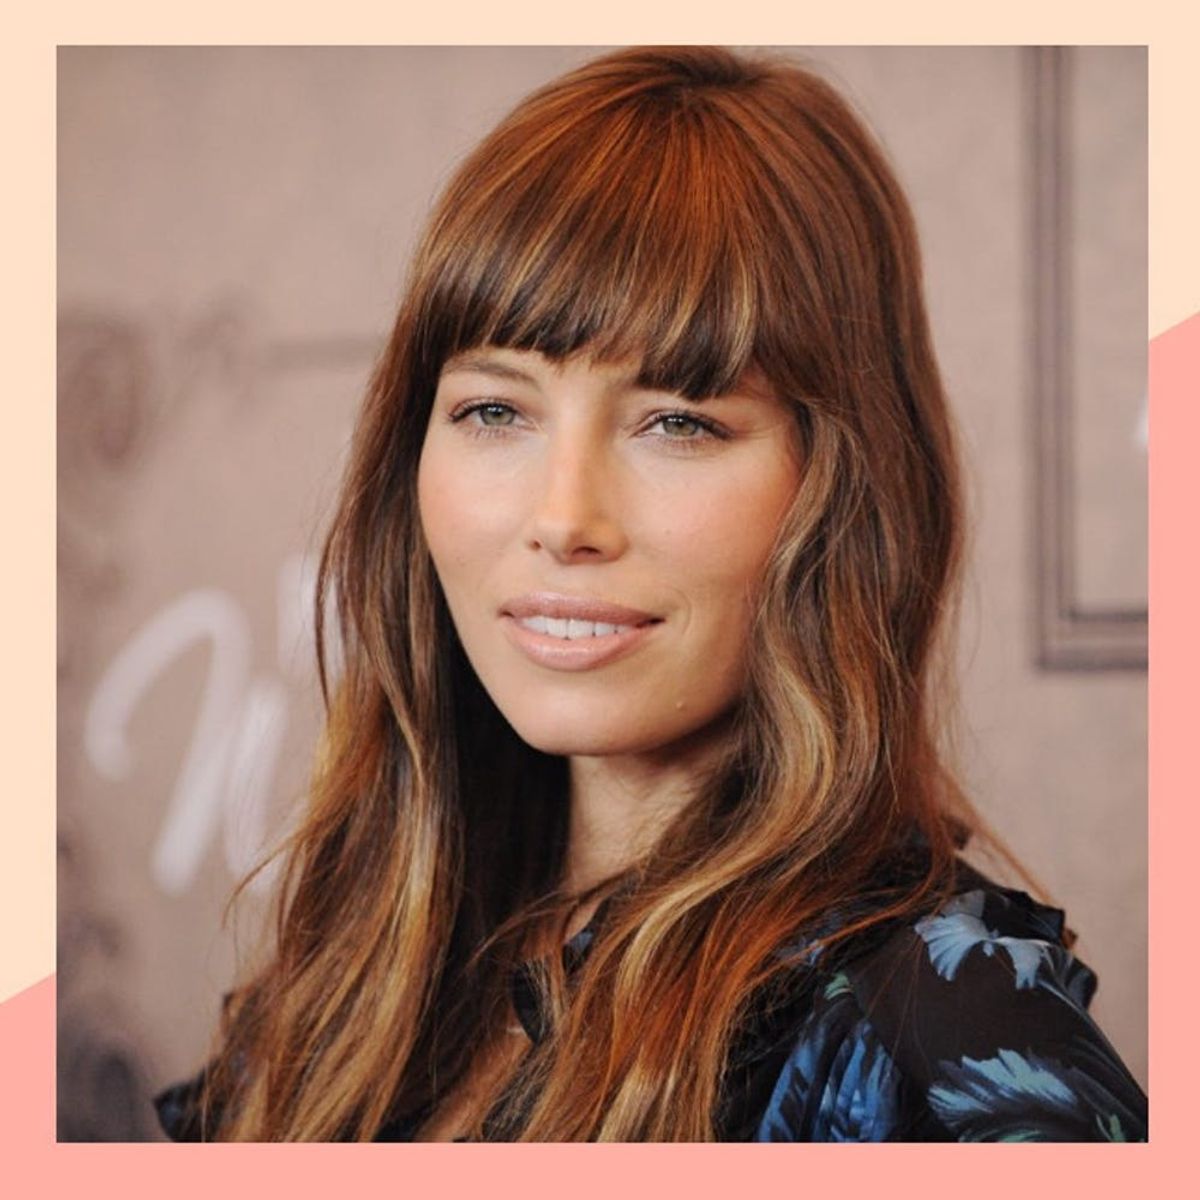 Apparently, Jessica Biel’s New Blonde Transformation Took Months to Complete